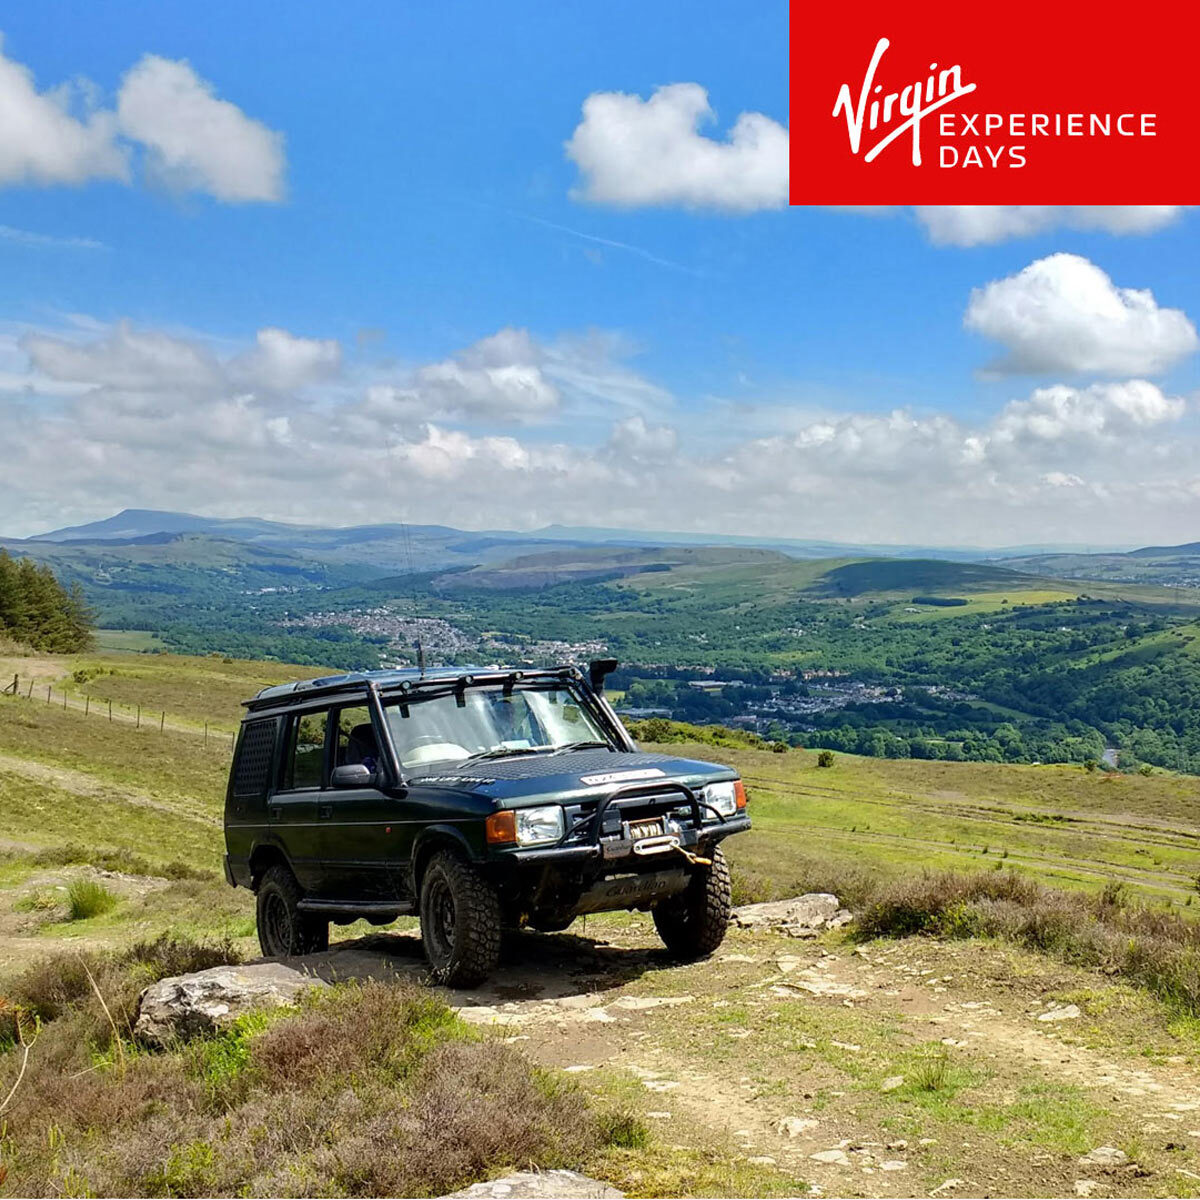 Buy Virgin Experience Introductory Off Road Driving Image3 at Costco.co.uk